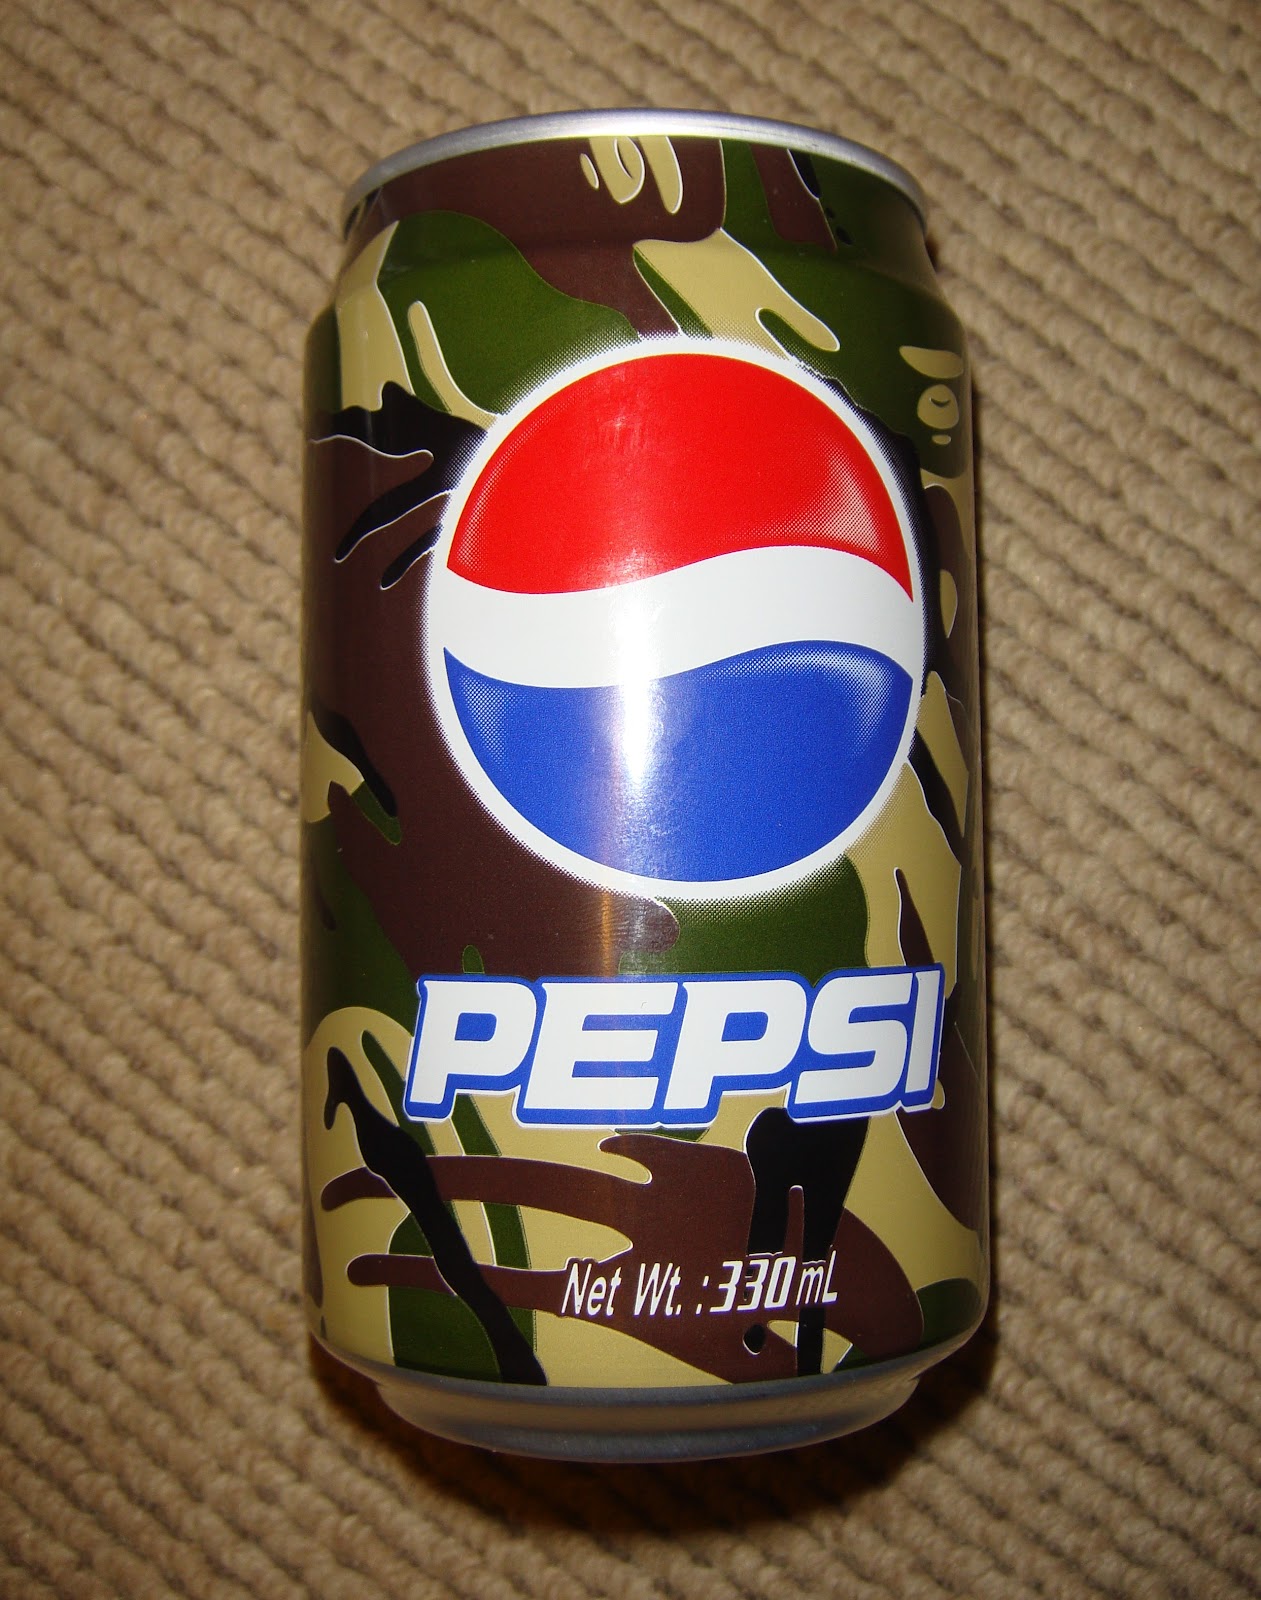 Supersupergirl's Food Reviews: AAPE By A Bathing Ape x Pepsi 